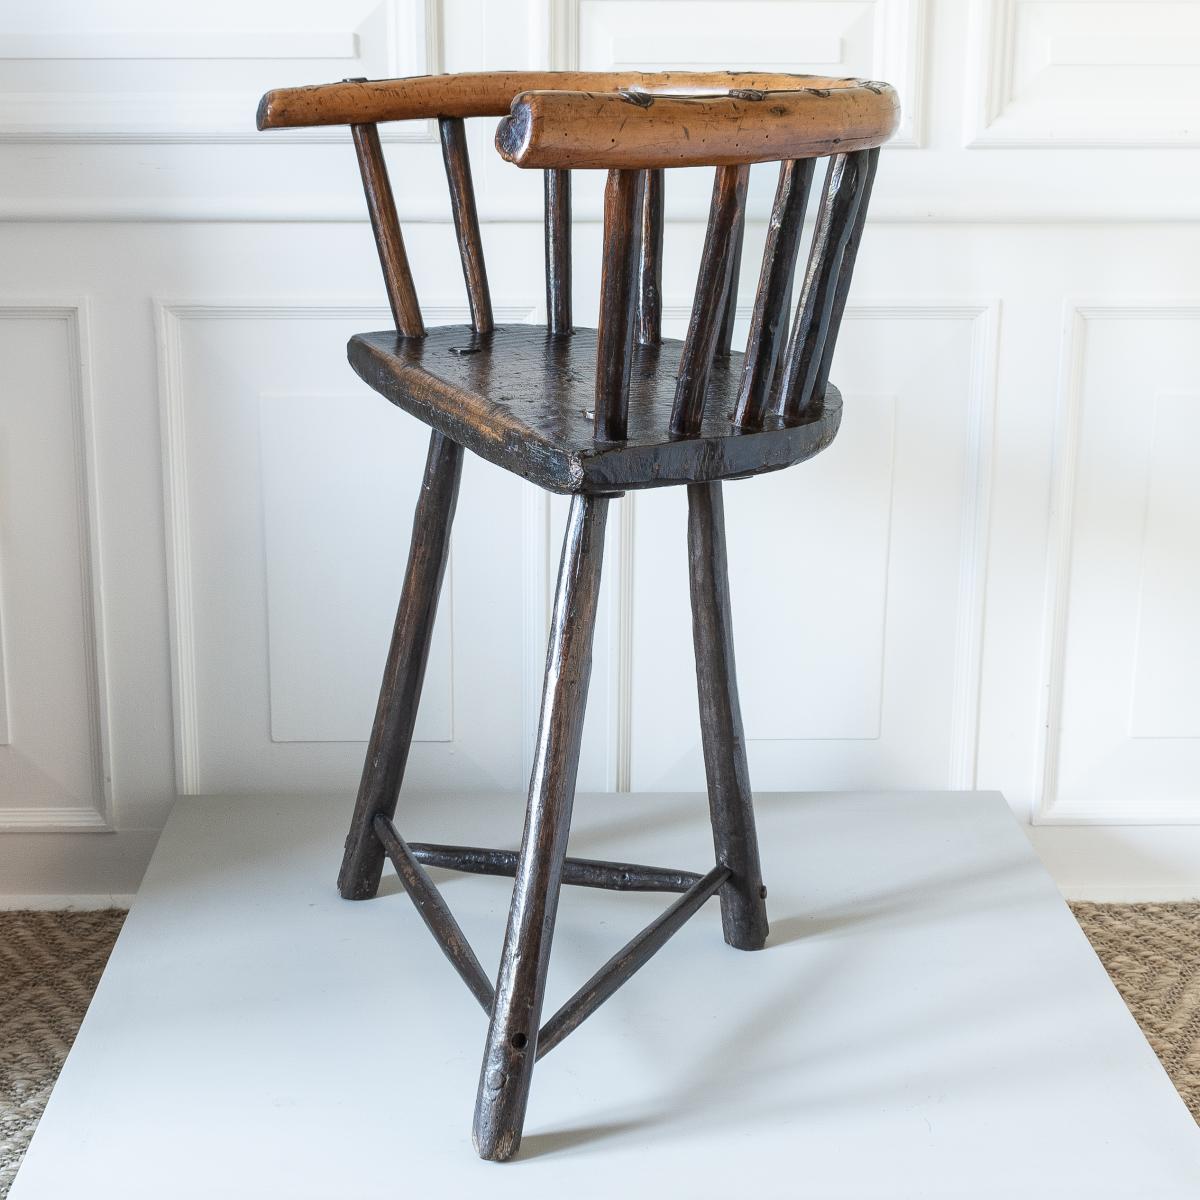 George III yew, sycamore and ash three-legged primitive chair